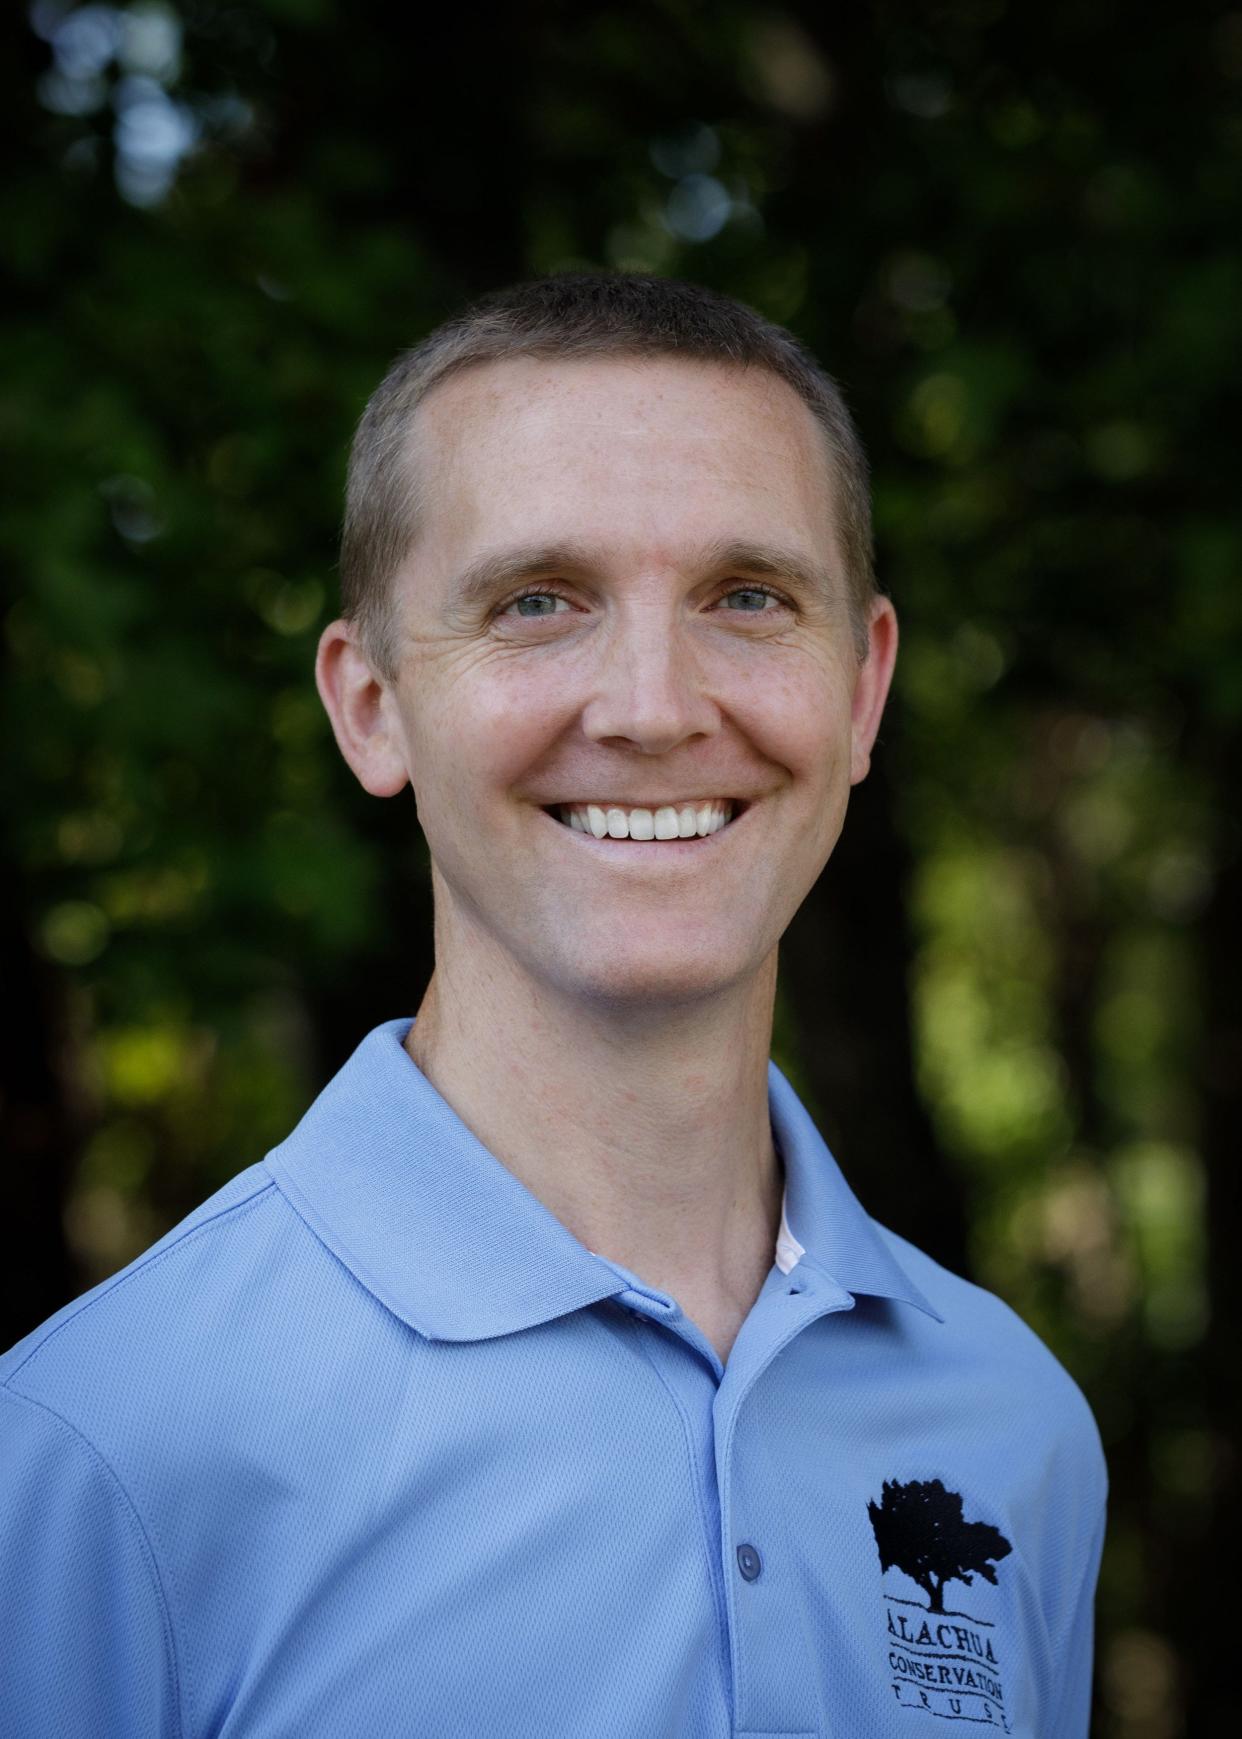 Tom Kay is the Executive Director of Alachua Conservation Trust, focusing conservation efforts in Alachua County and throughout north-central Florida.